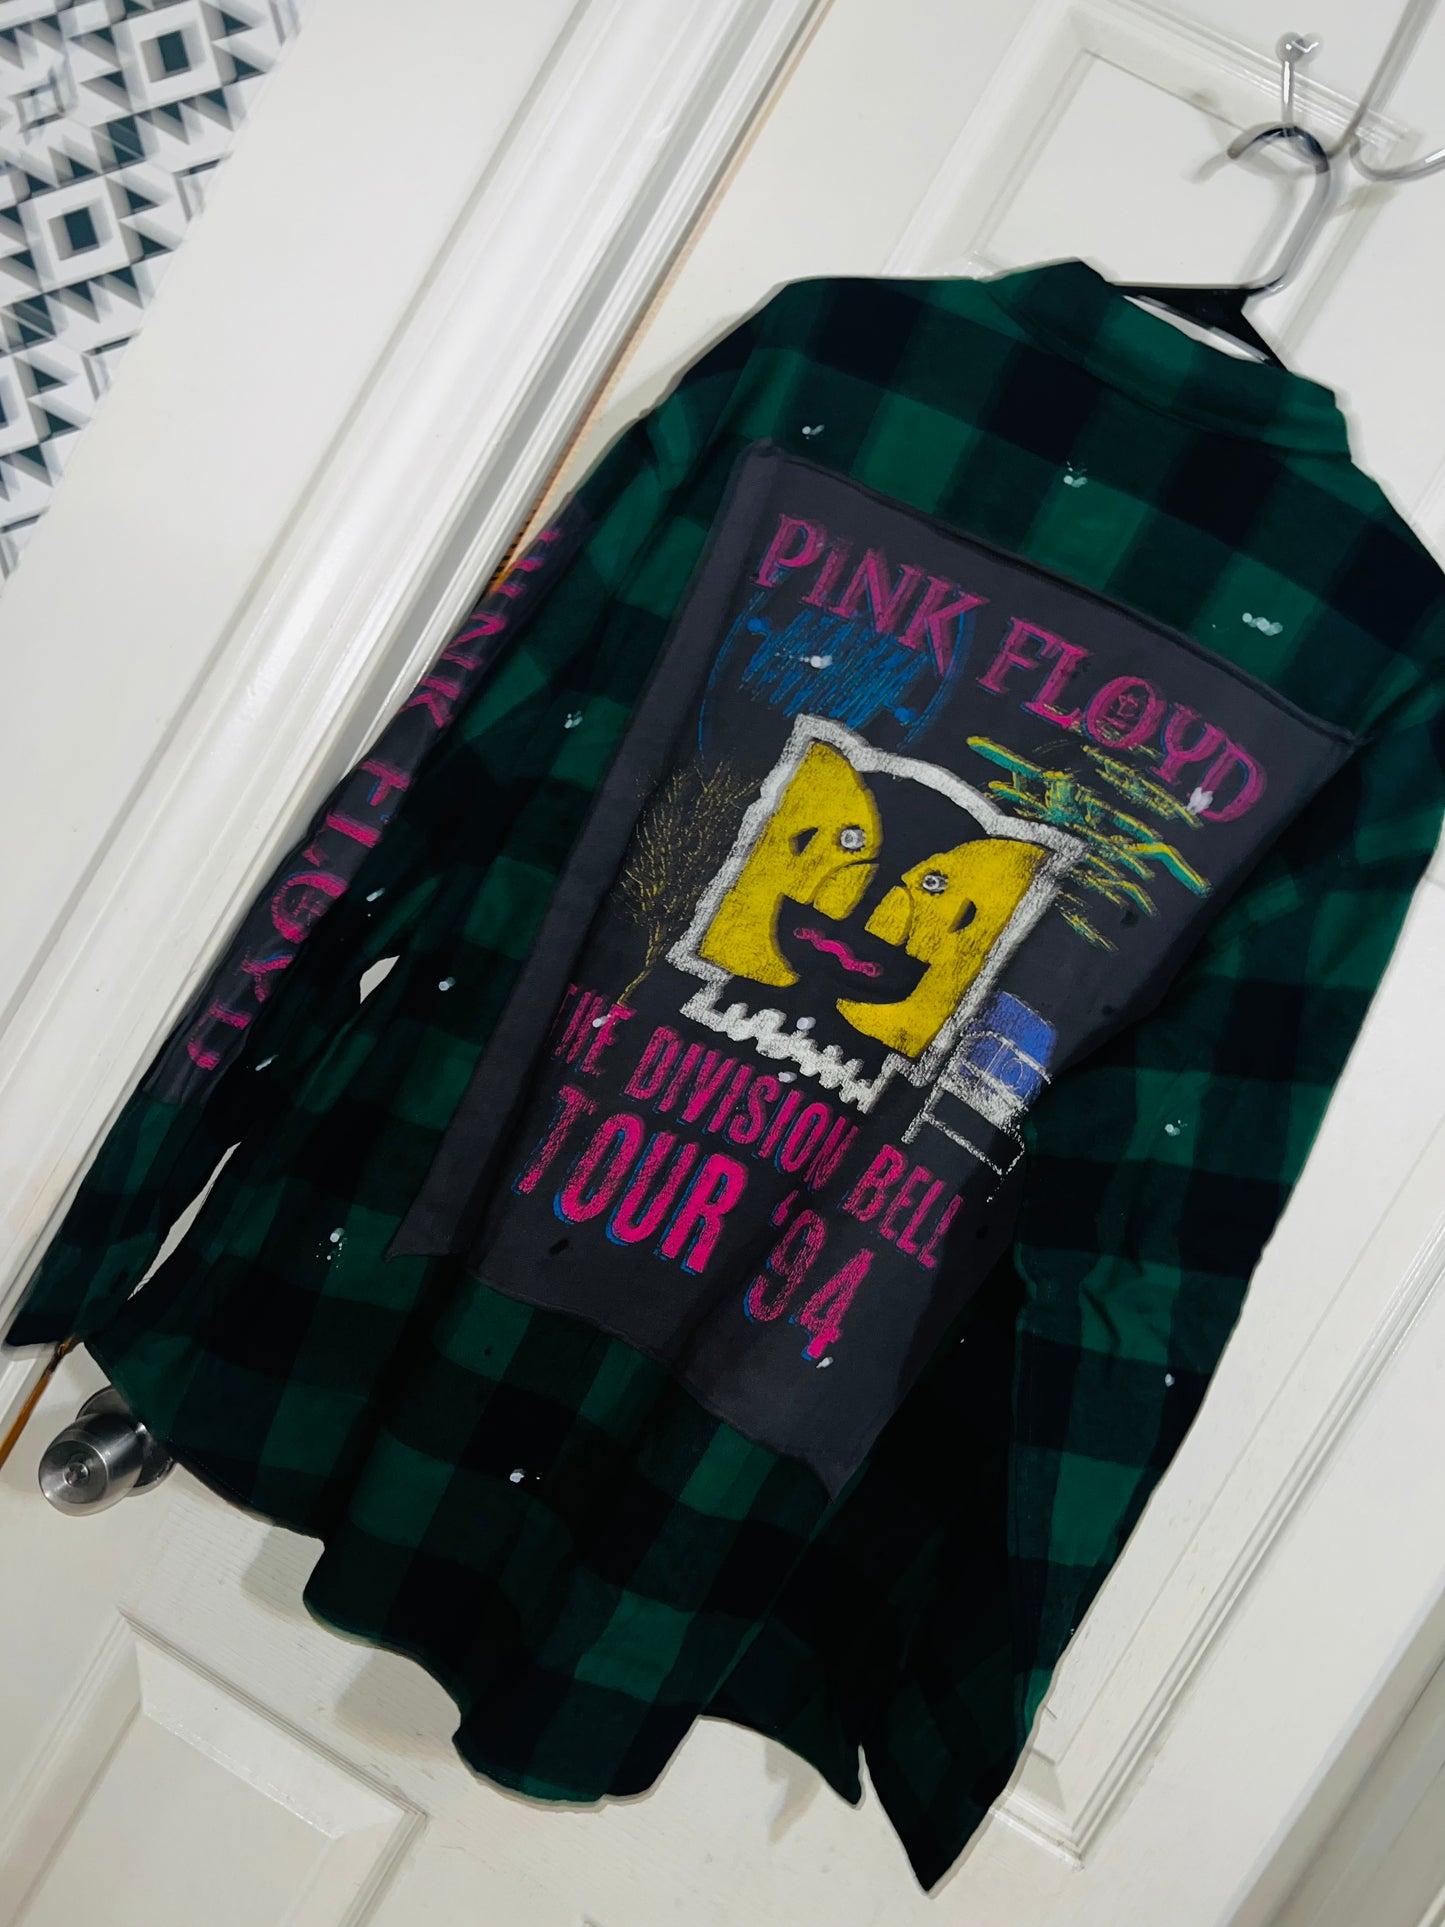 Pink Floyd Flannel 94 Tour with Back Patches/Patches